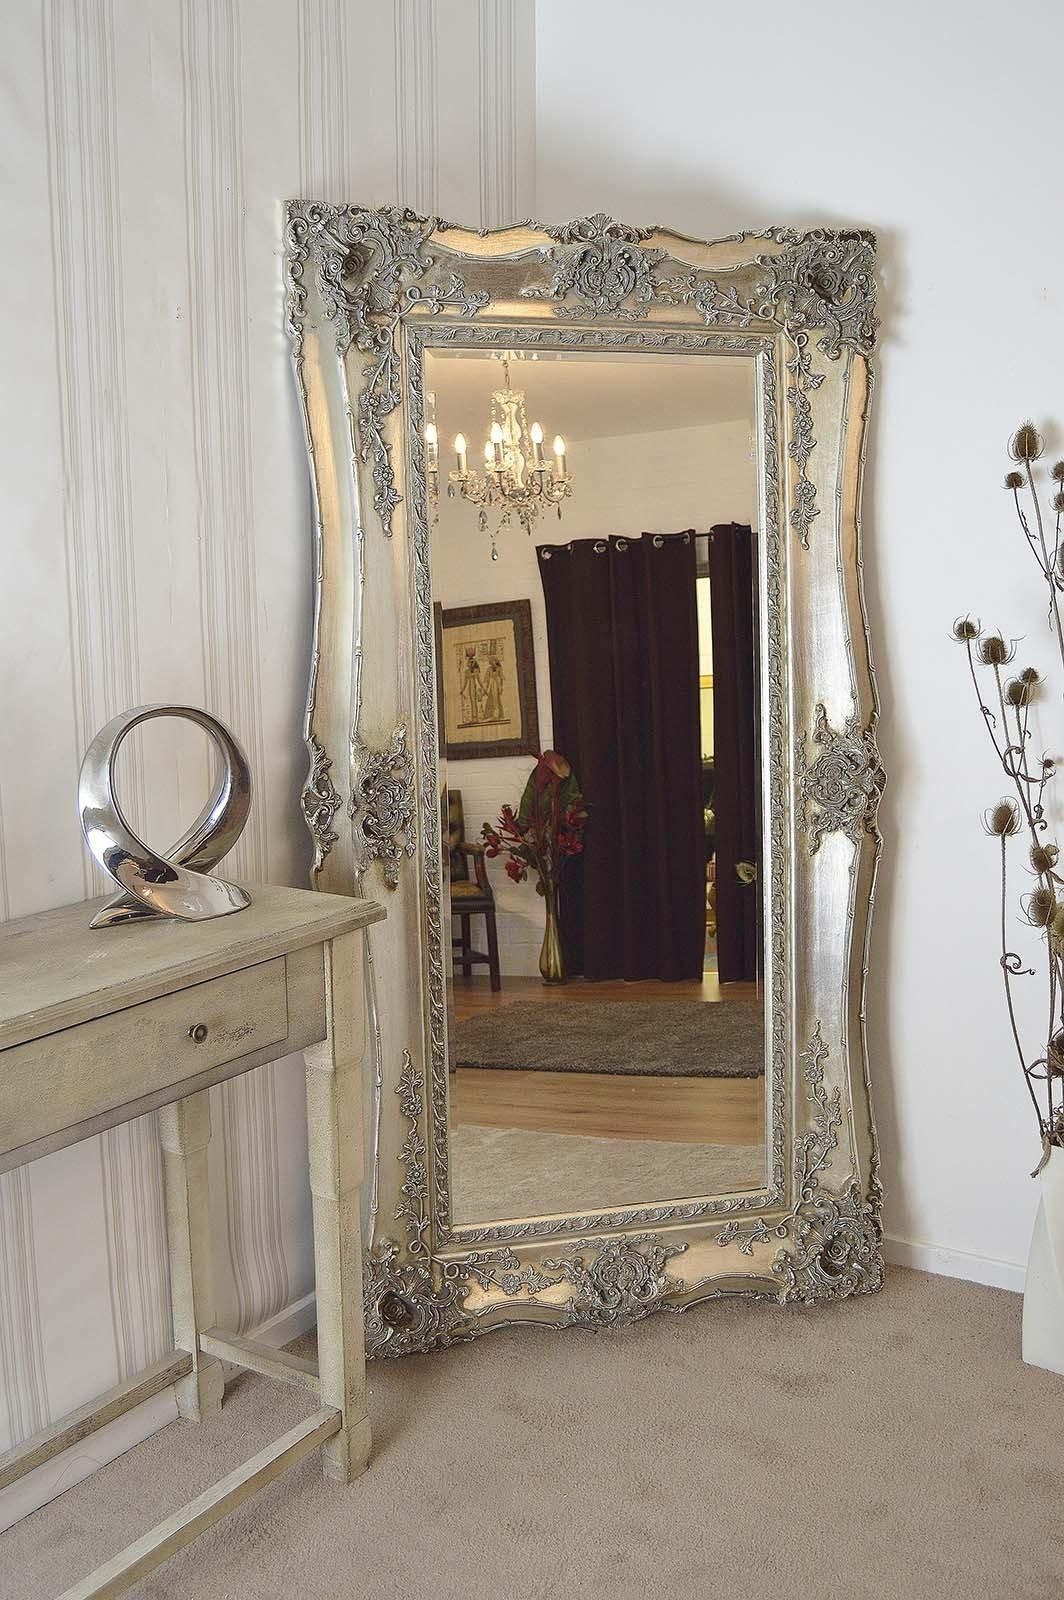 Large Antique Wall Mirror Ornate Frame Antique Ornate Wall Mirrors With Ornate Wall Mirrors (Photo 2 of 20)